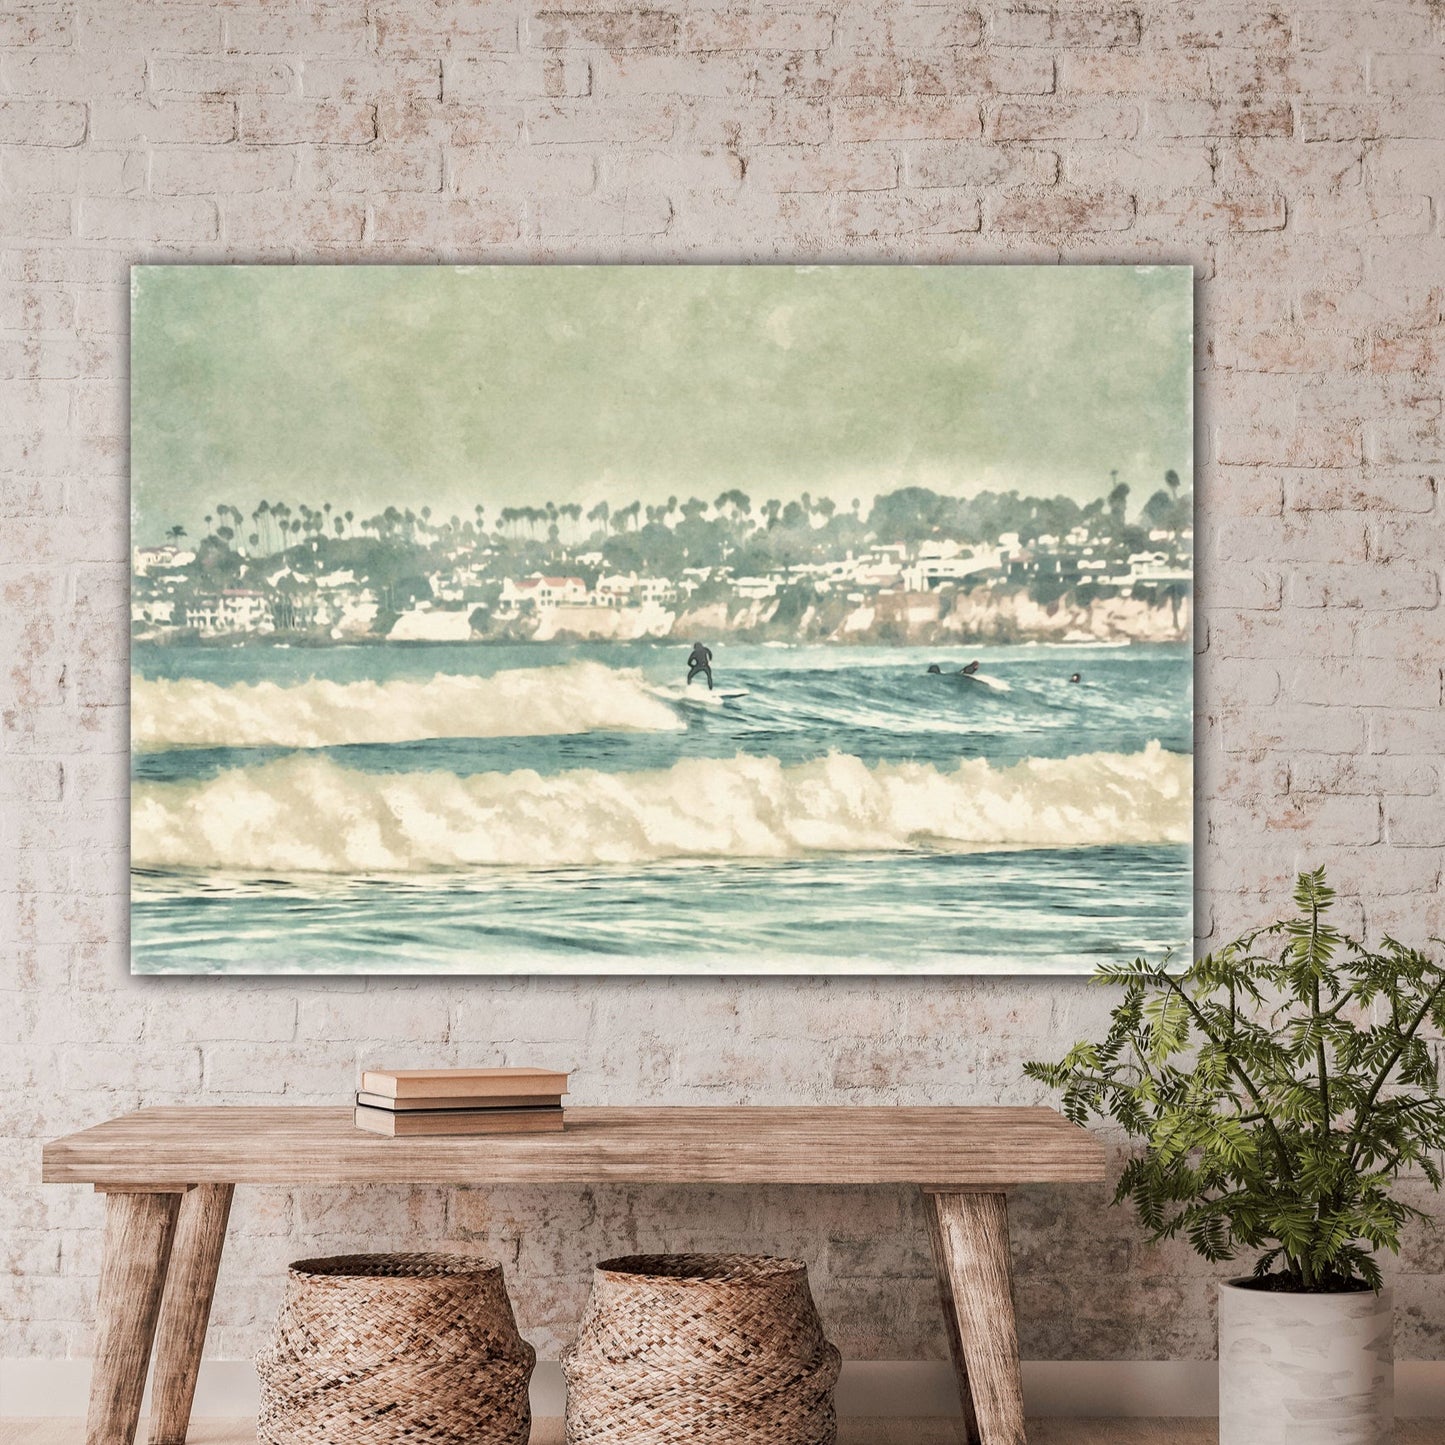 surfing the waves at mission beach home decor by jacqueline mb designs 